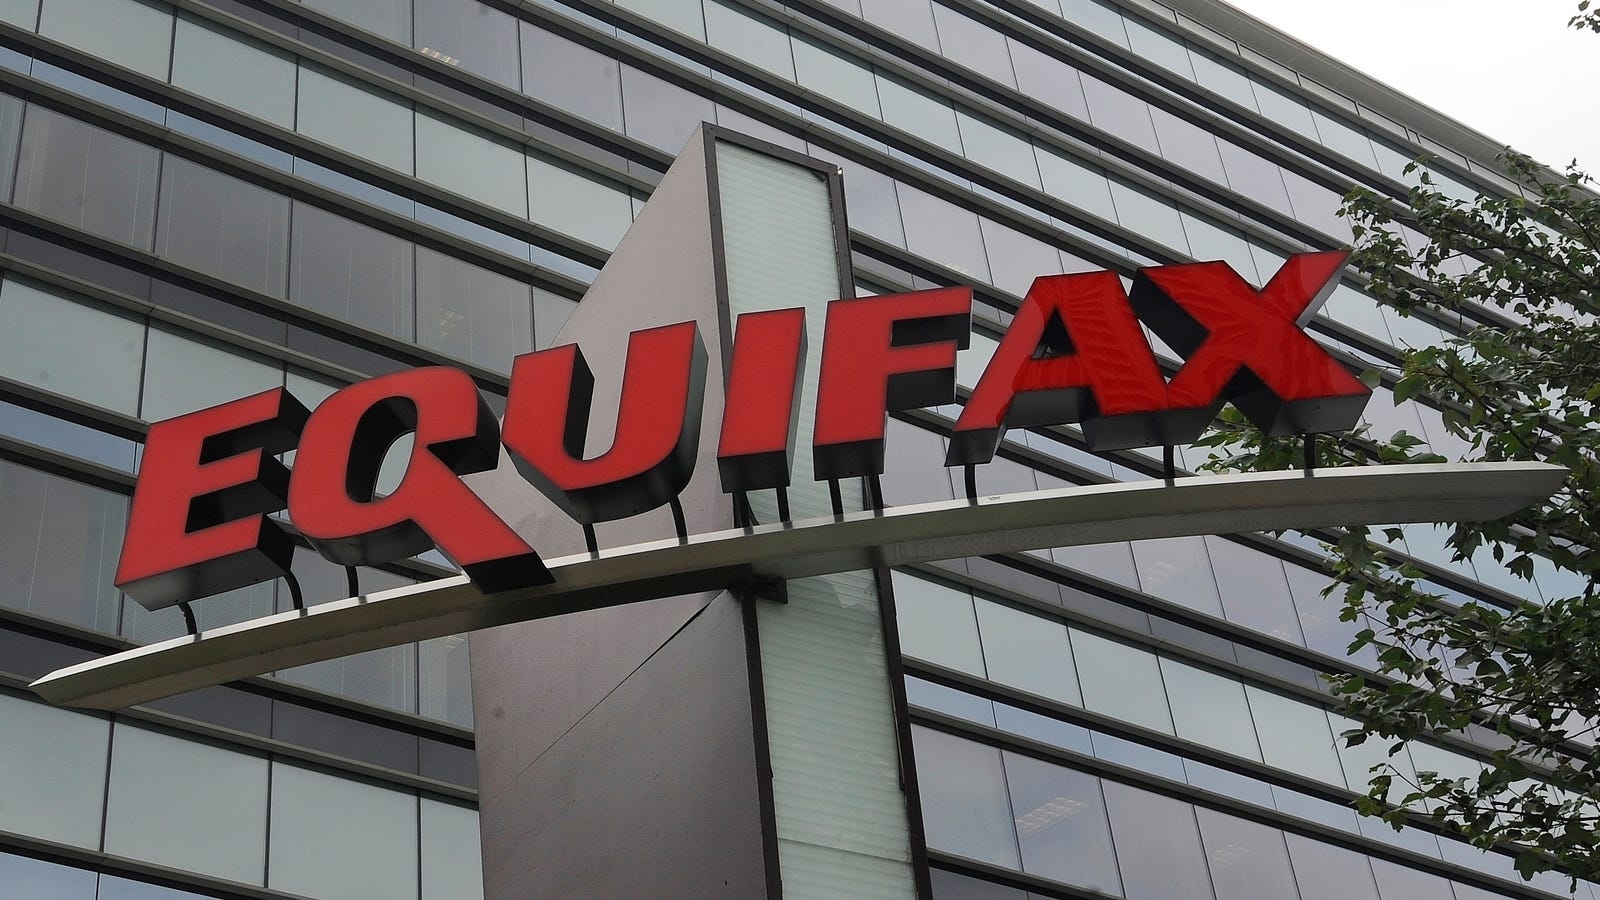 lifting a credit freeze with equifax